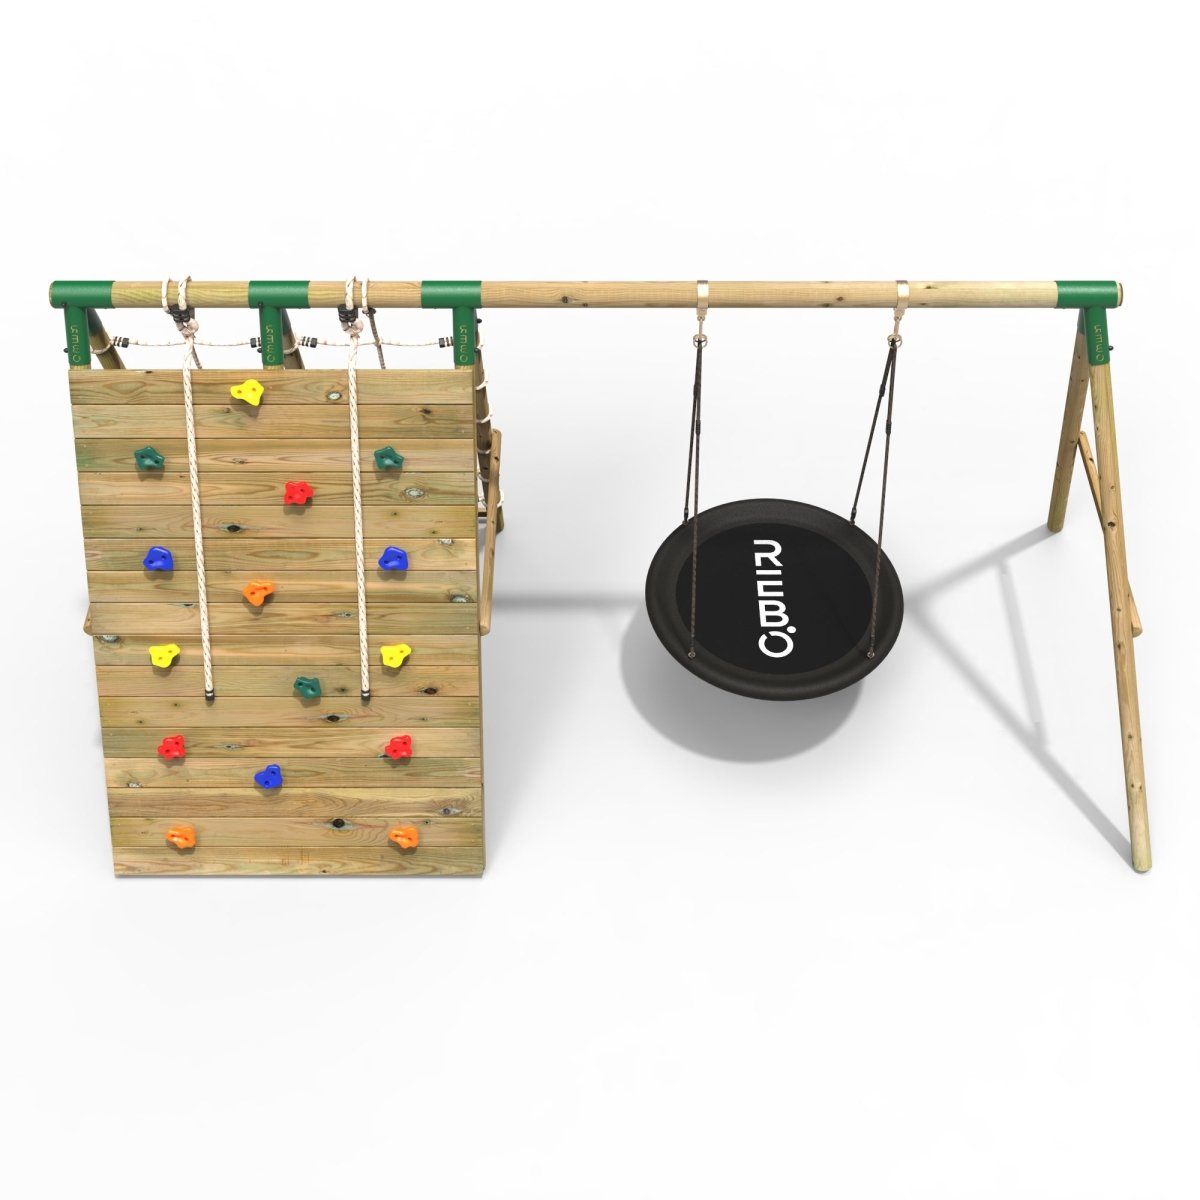 Rebo Beat The Wall Wooden Swing Set with Double up & Over Climbing Wall – Zenith